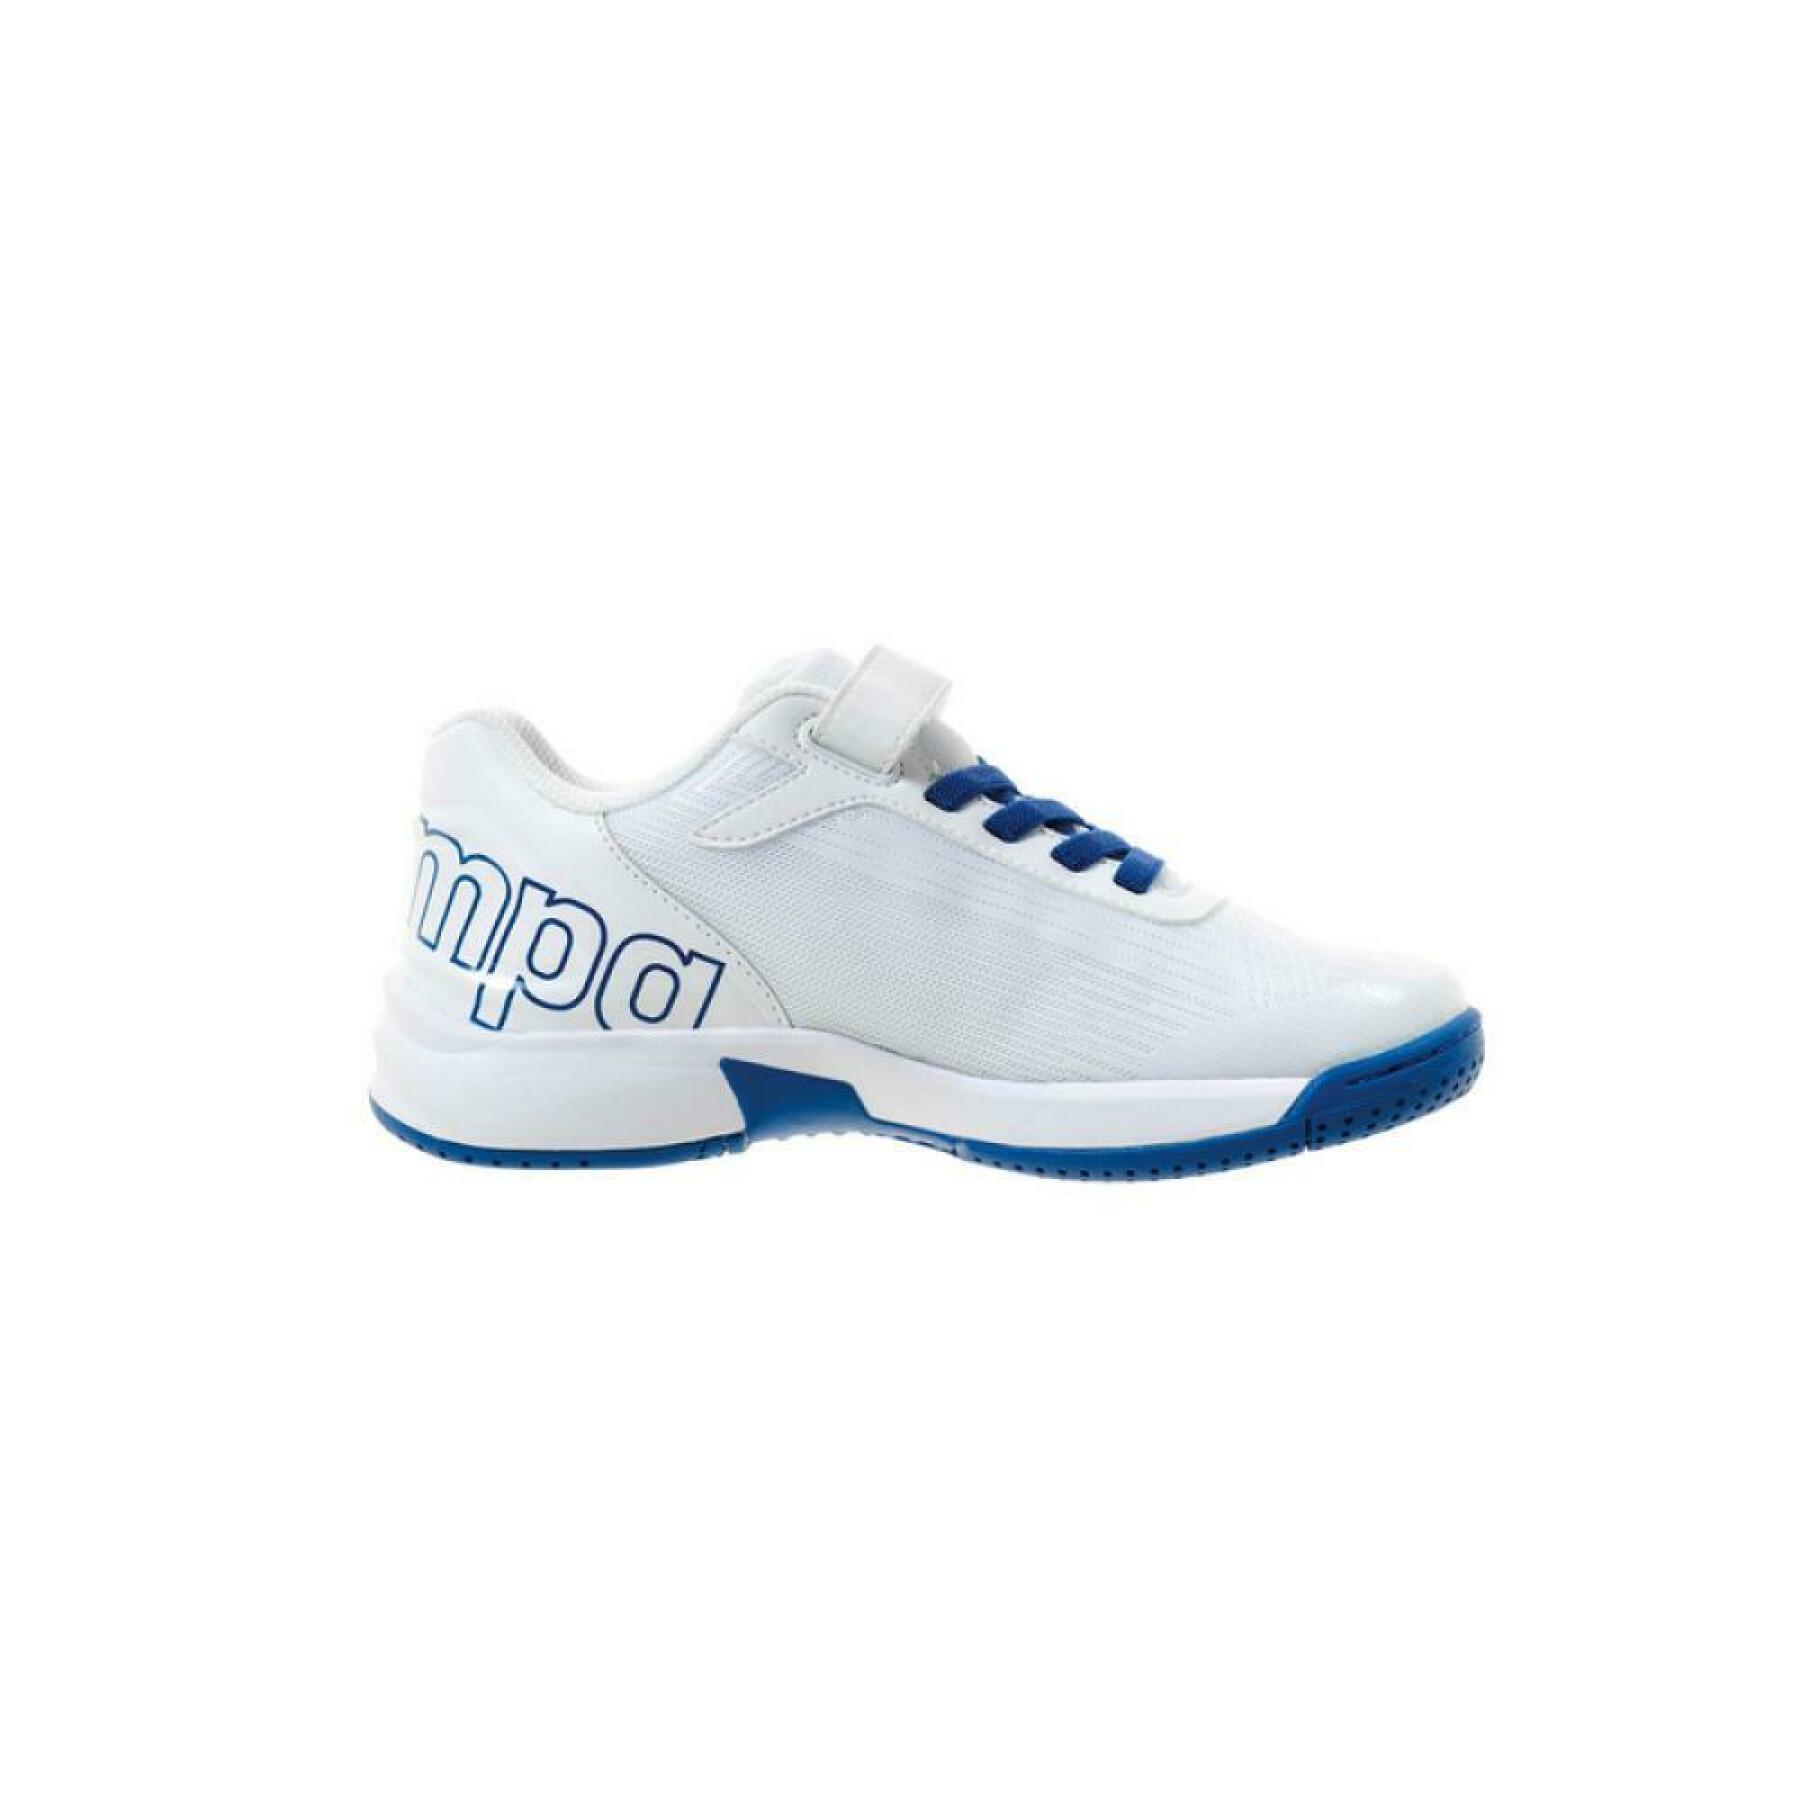 Indoor shoes for children Kempa Attack 2.0